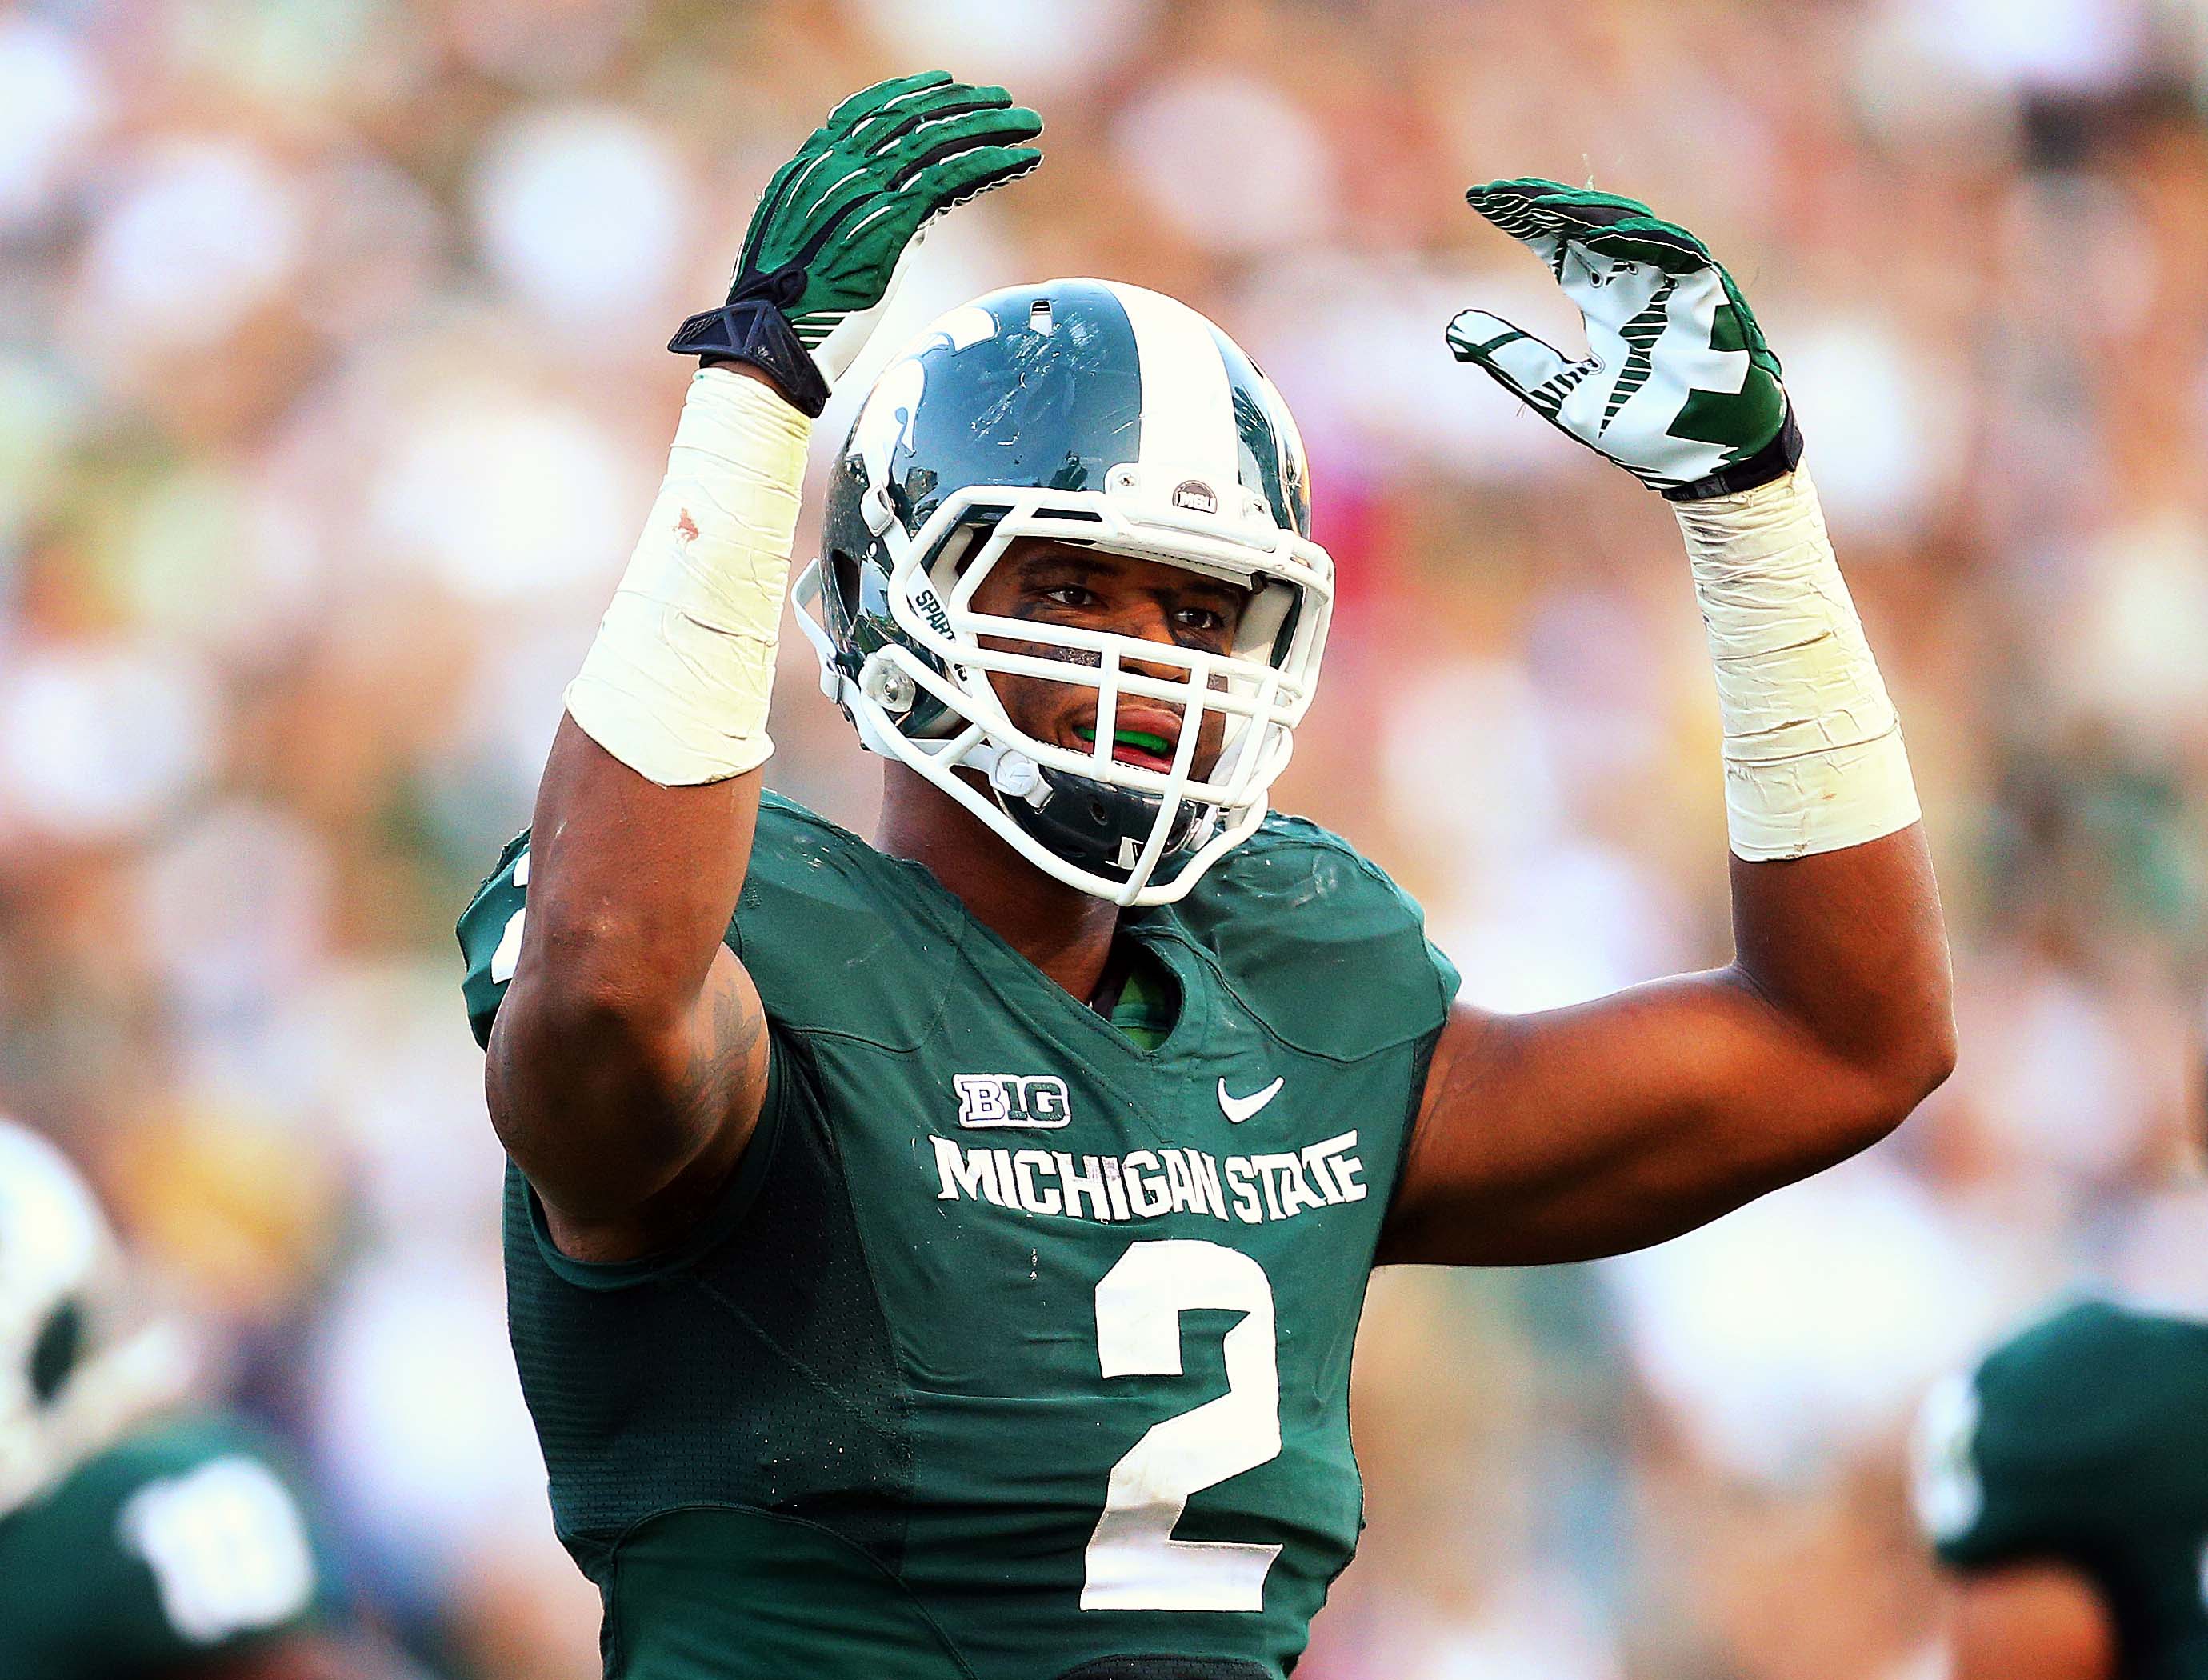 The top ten highestranked Michigan State Football recruits since 2000